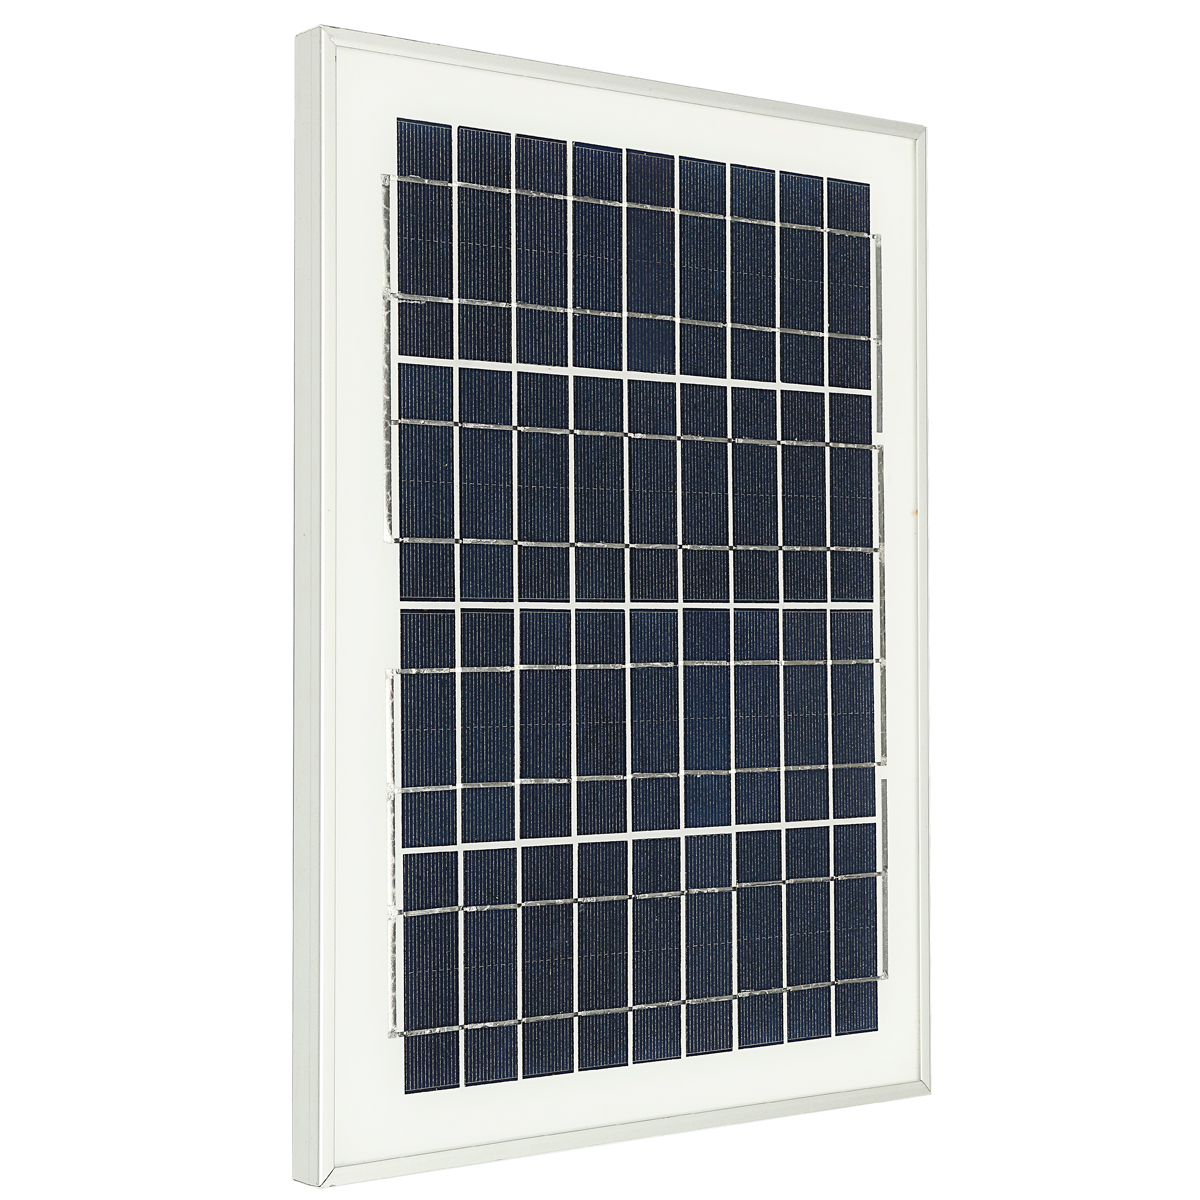 18V 10W Solar Panel For Outdoor Fountain Pond Pool Garden Submersible Water Pump With Crocodile Thre 5